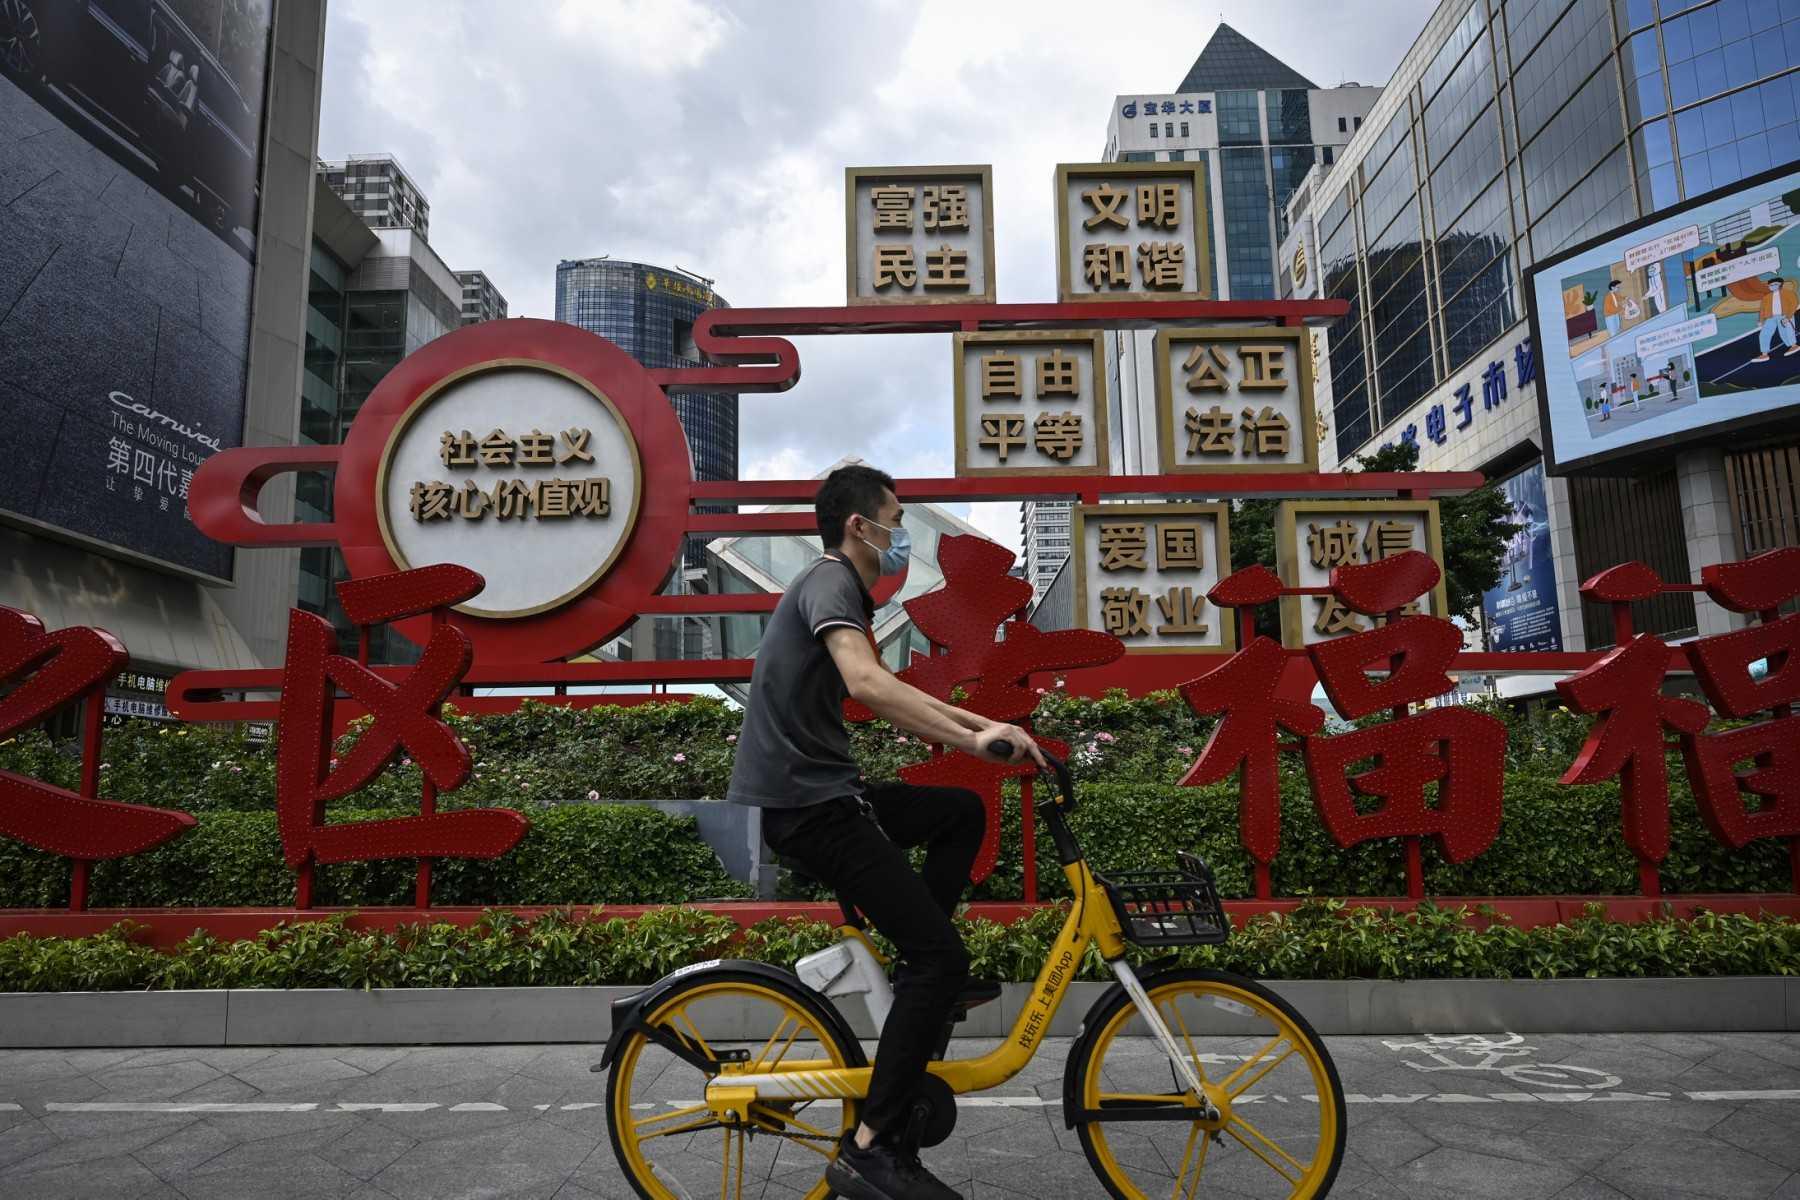 This photo taken on July 12 shows a man riding past a sign displaying a propaganda slogan of socialist core values in Shenzhen in China's southern Guangdong province. Photo: AFP